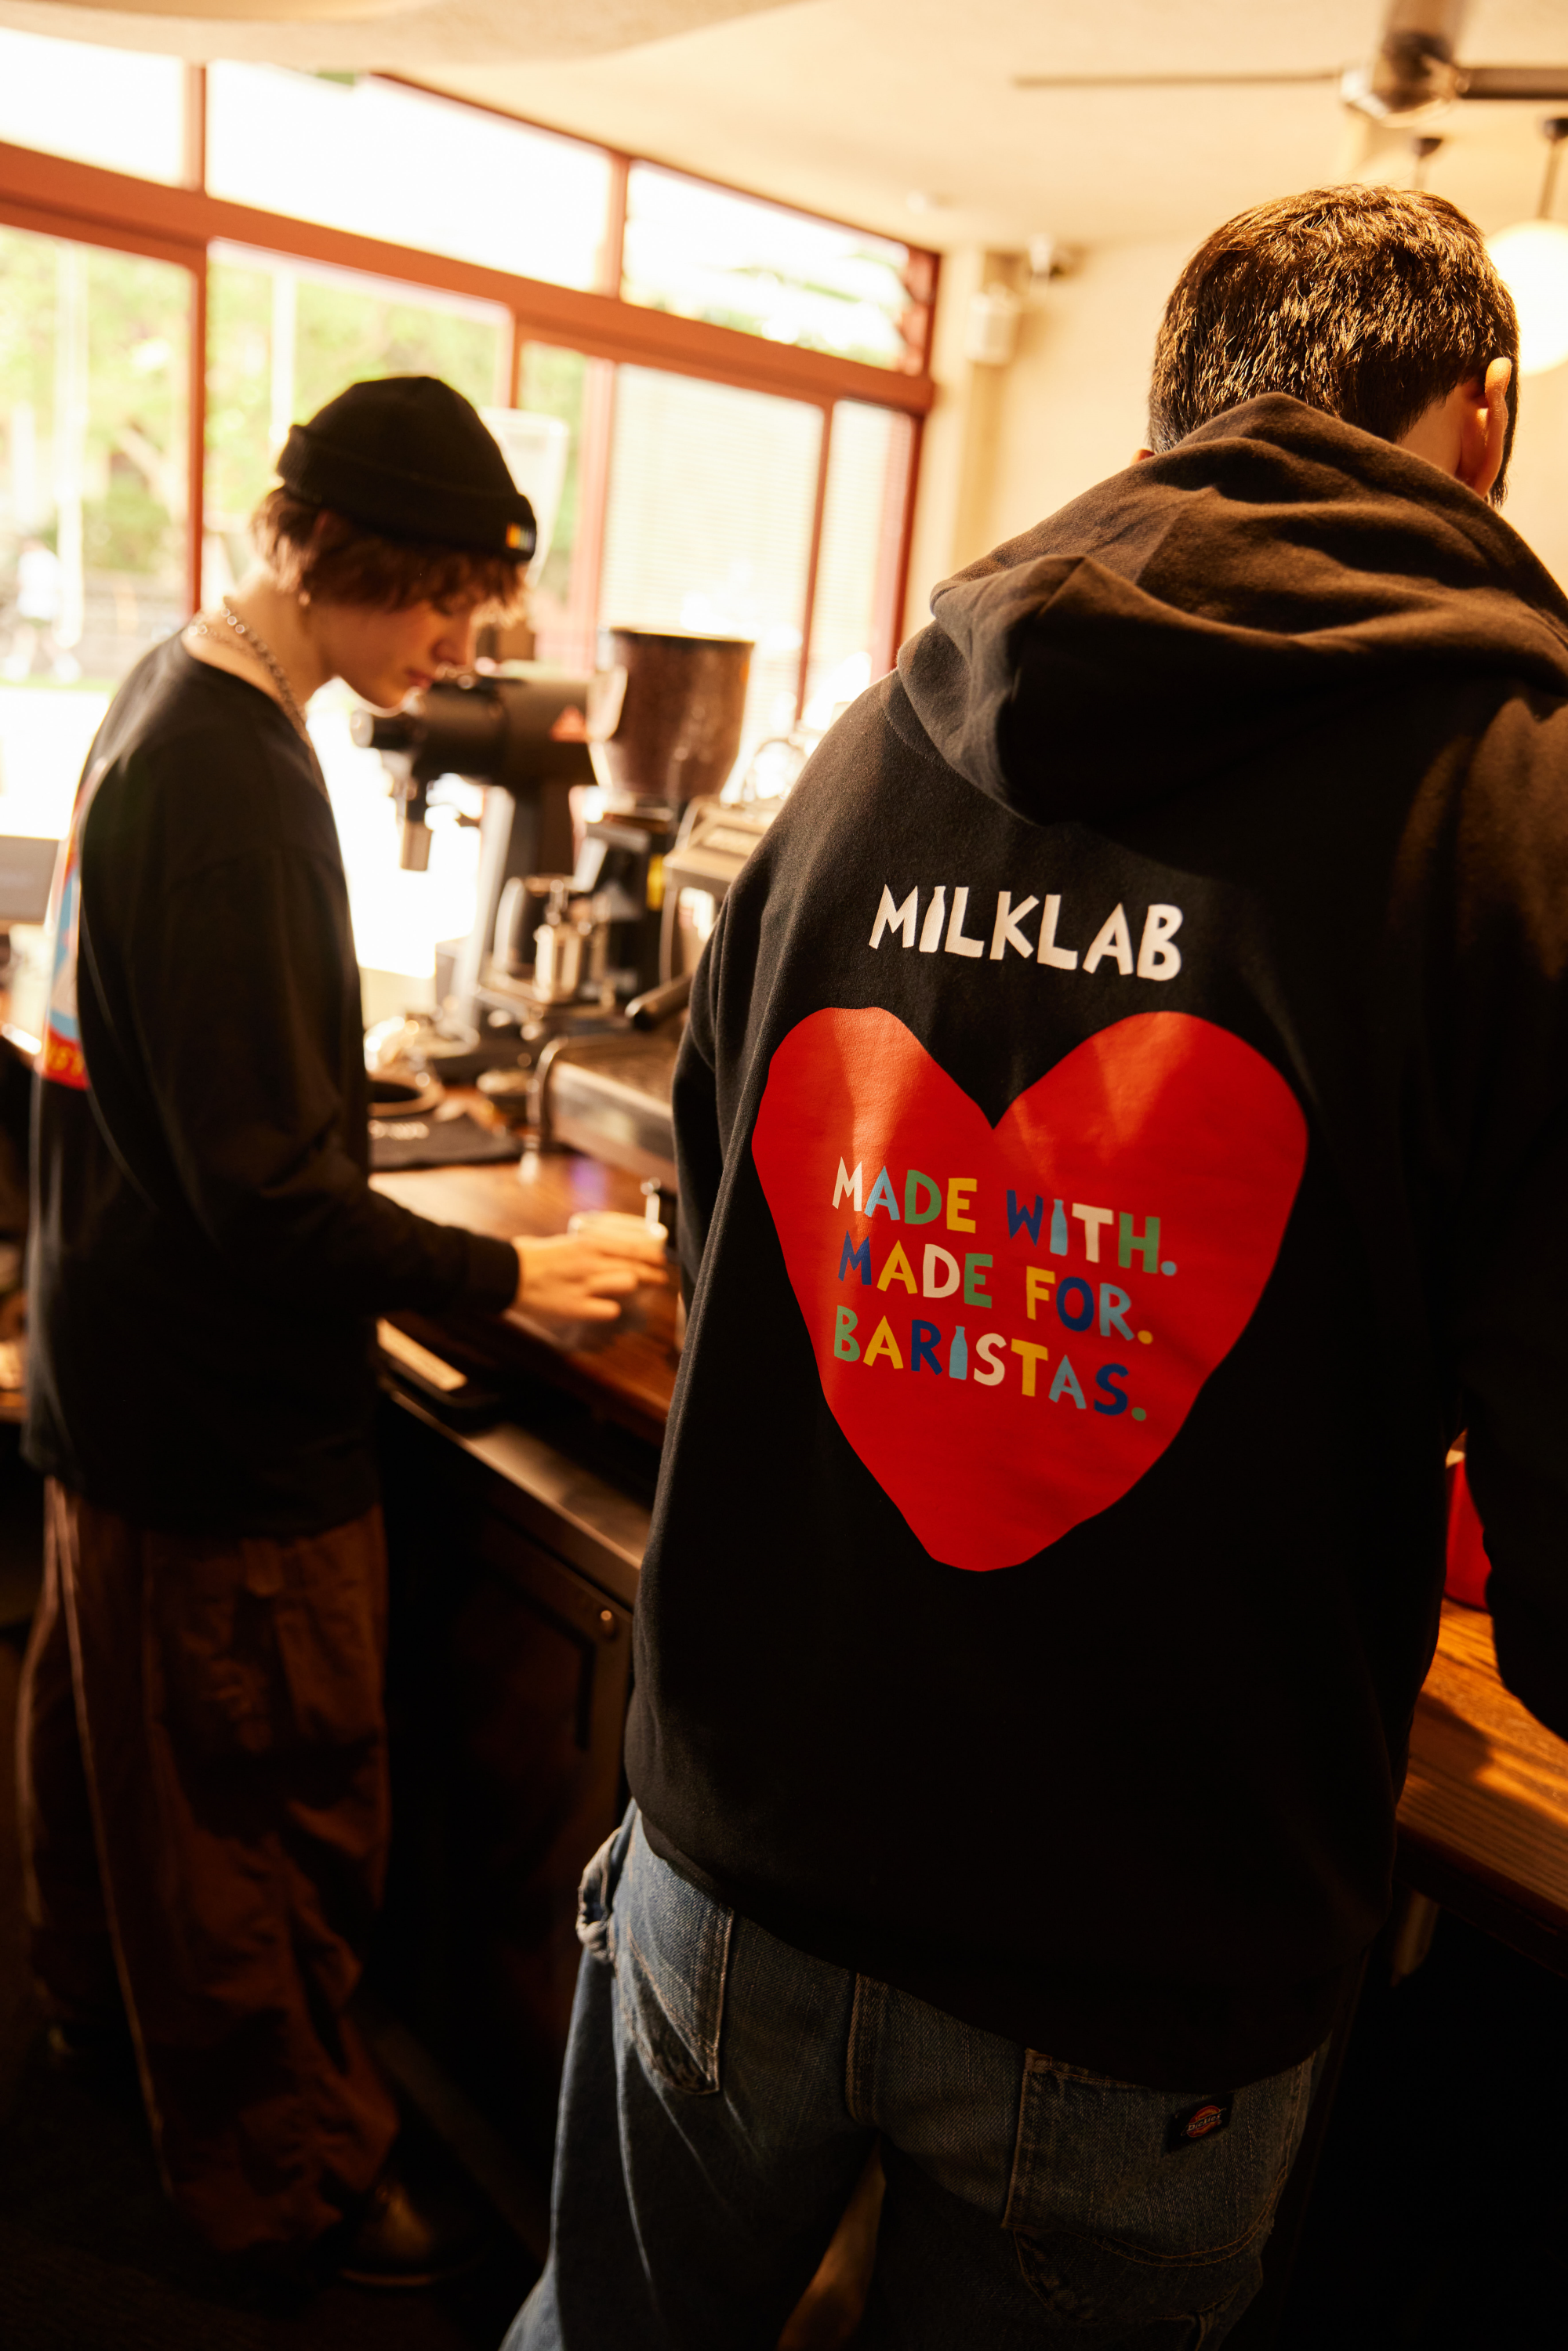 Made for Baristas: Heart Hoodie